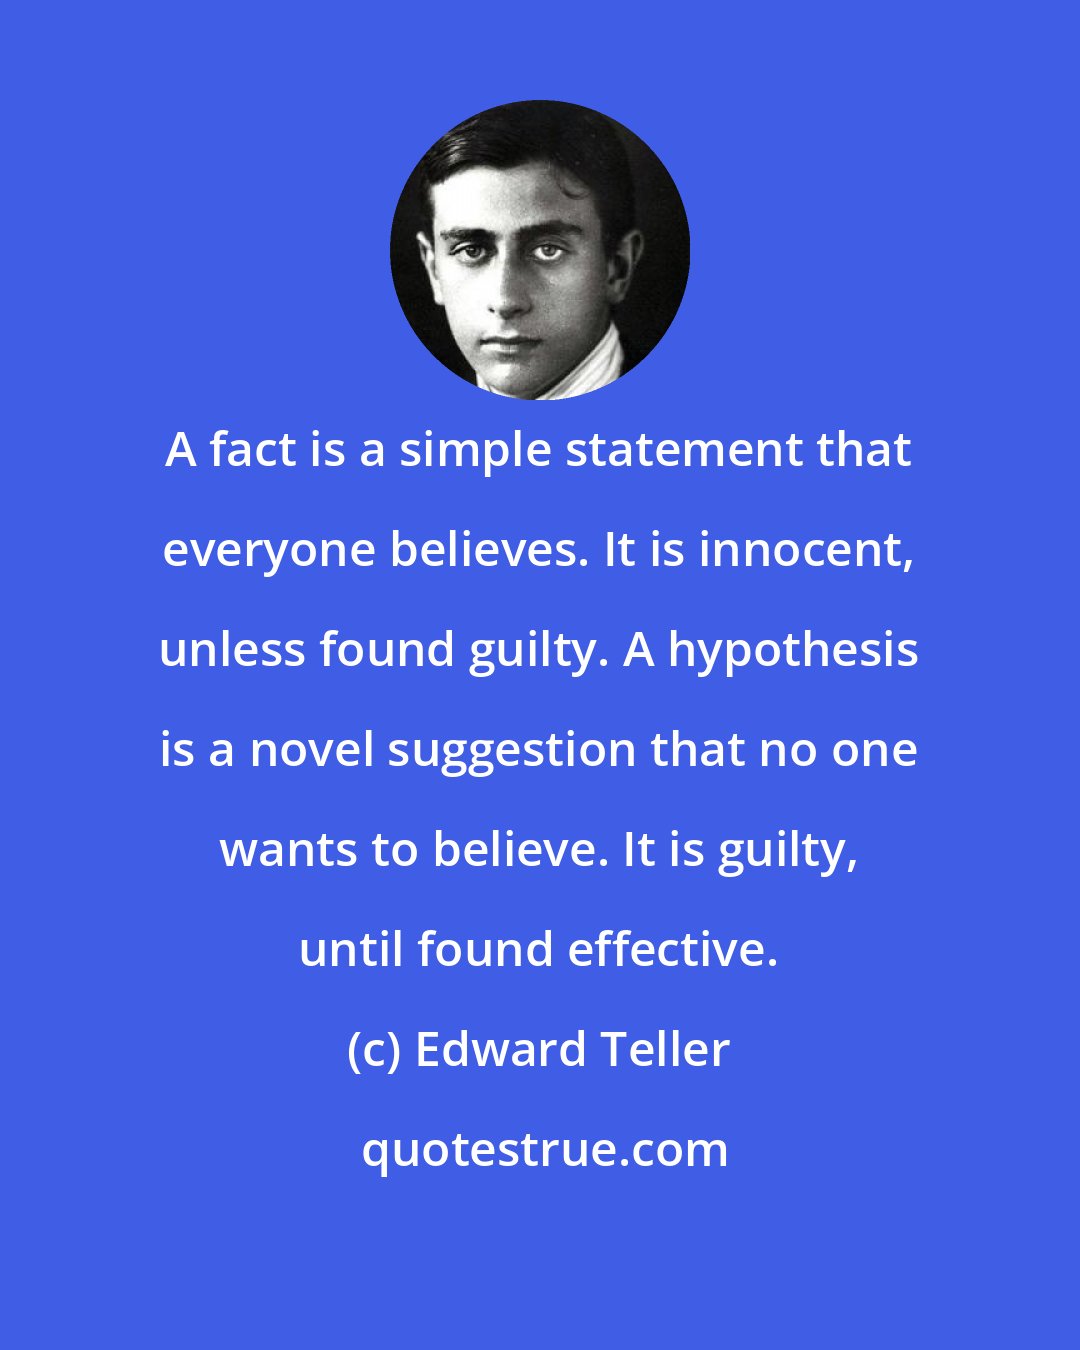 Edward Teller: A fact is a simple statement that everyone believes. It is innocent, unless found guilty. A hypothesis is a novel suggestion that no one wants to believe. It is guilty, until found effective.